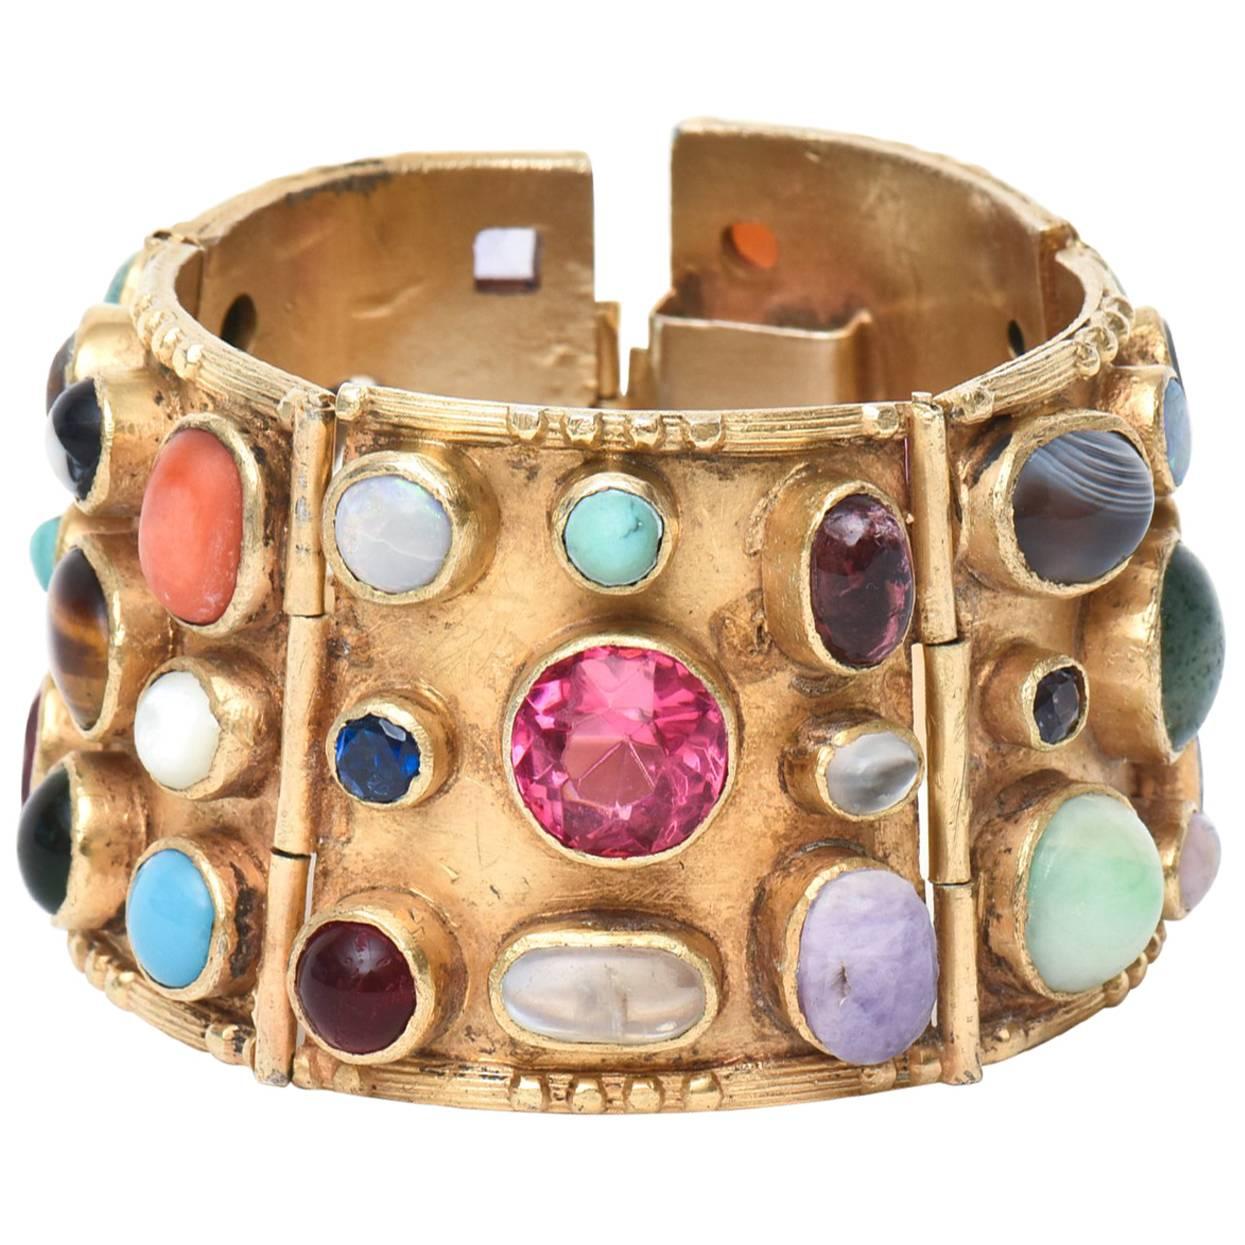 Gold Plated Over Sterling Silver and Semi Precious Stones Cuff Bracelet / SALE